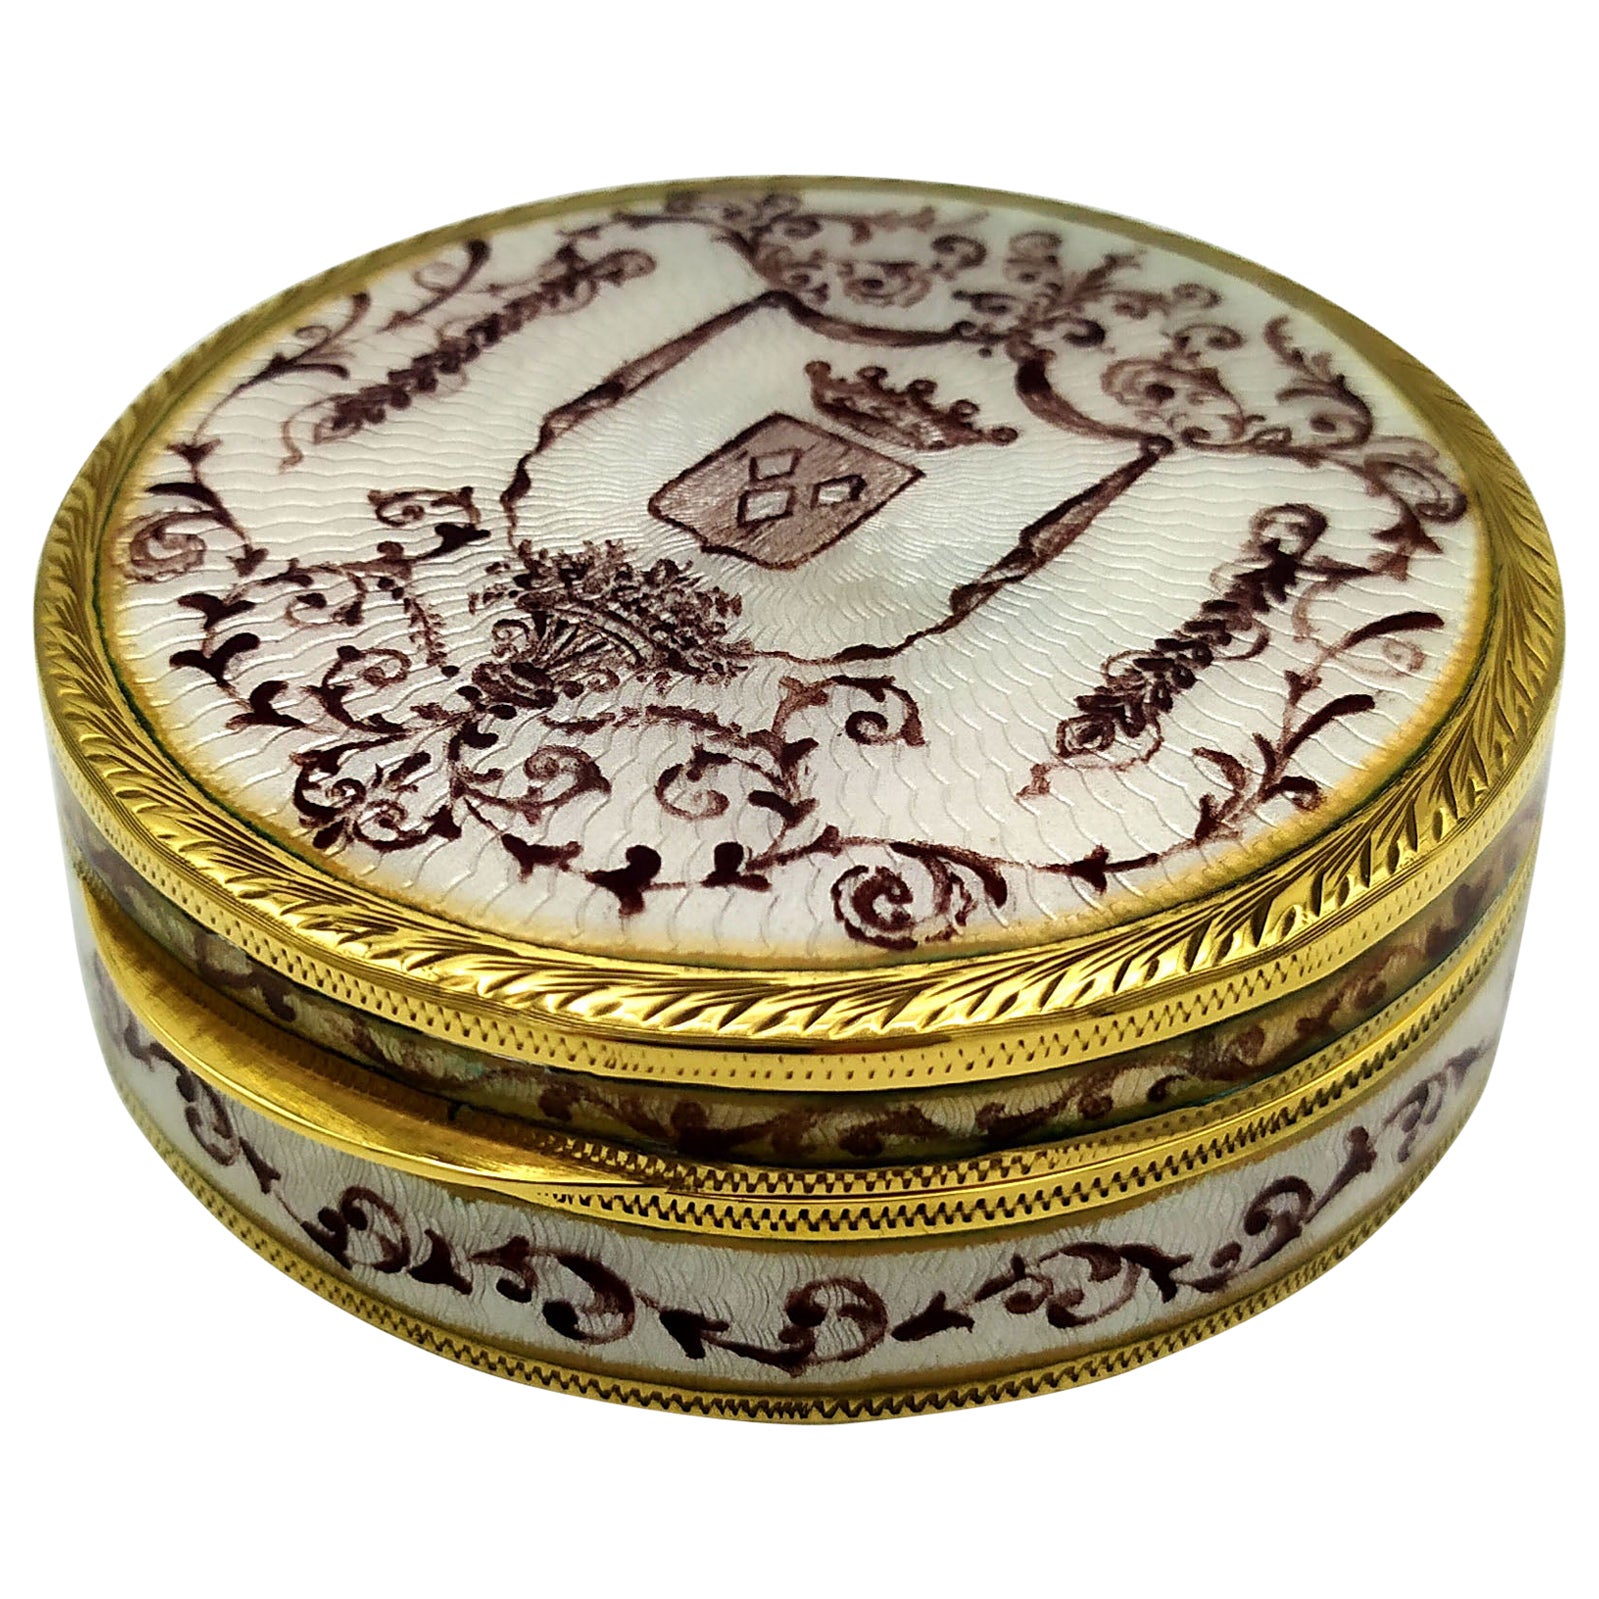 Snuff Box White with noble coat of arms Baroque style Sterling Silver Salimbeni